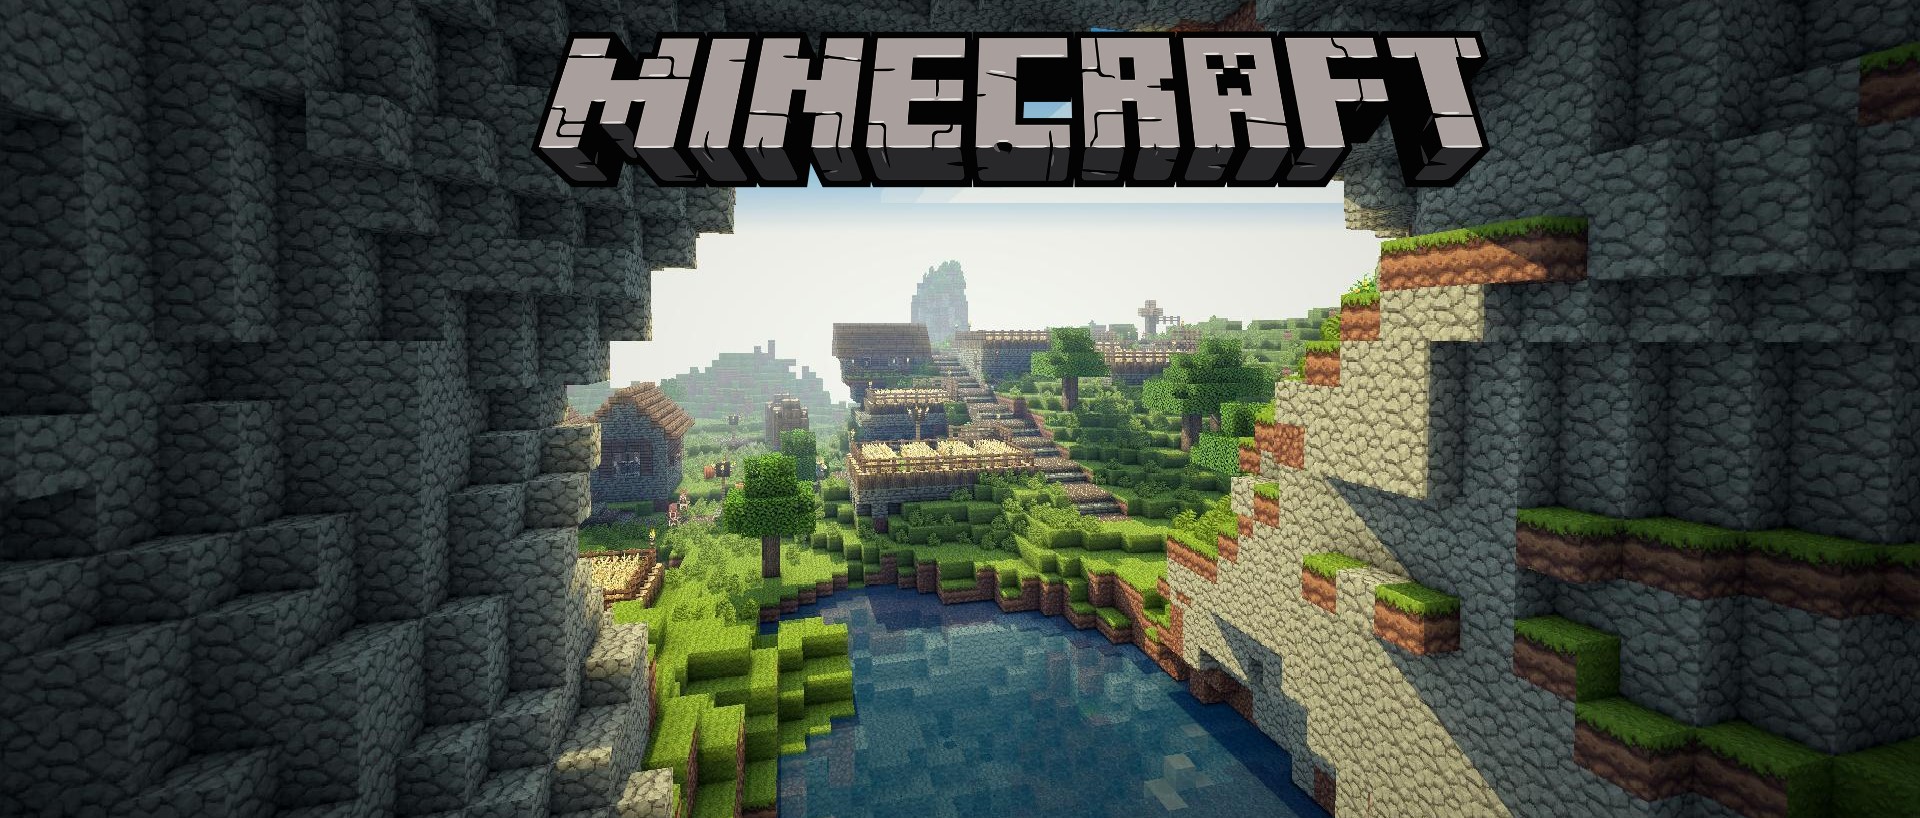 free download and play minecraft for my pc full version